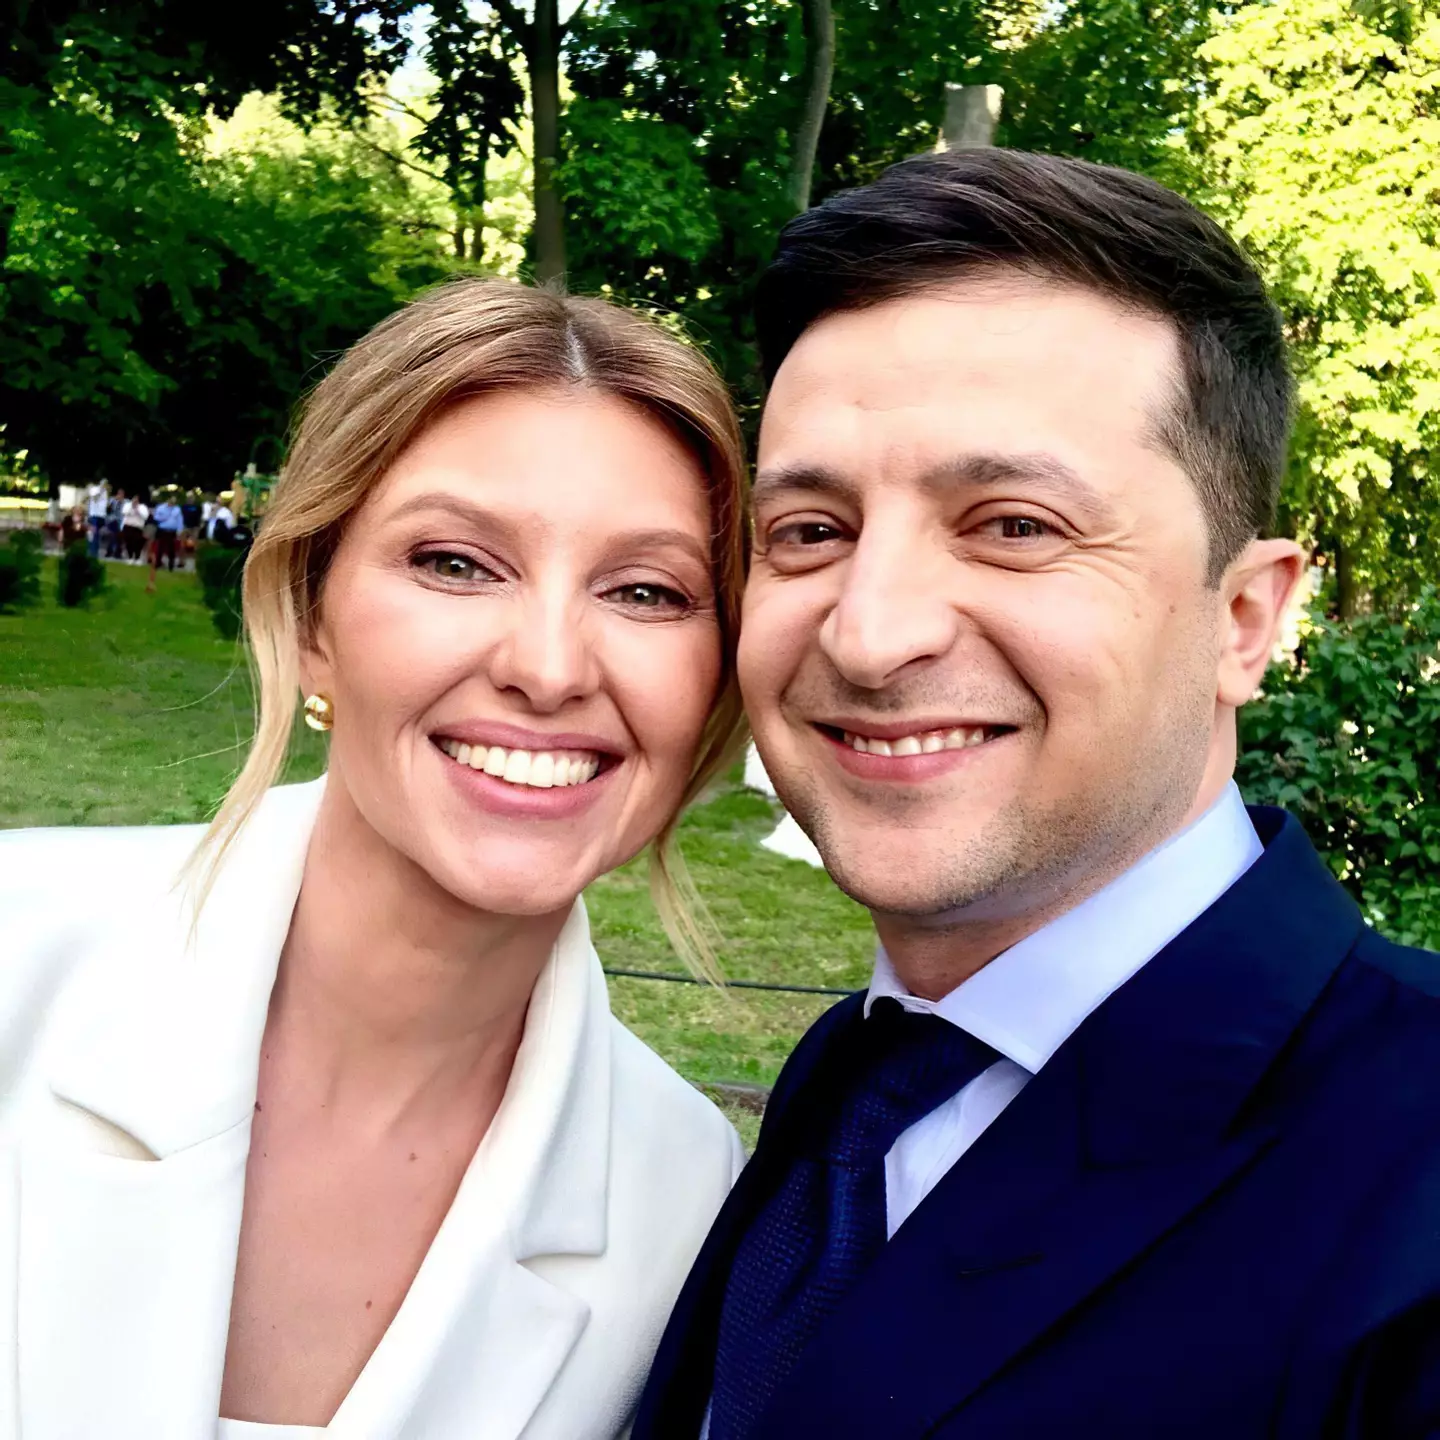 Zelenskyy and his wife Olena Zelenska had to wake up their children quickly when the bombing first began in Ukraine on the night of 24 February.